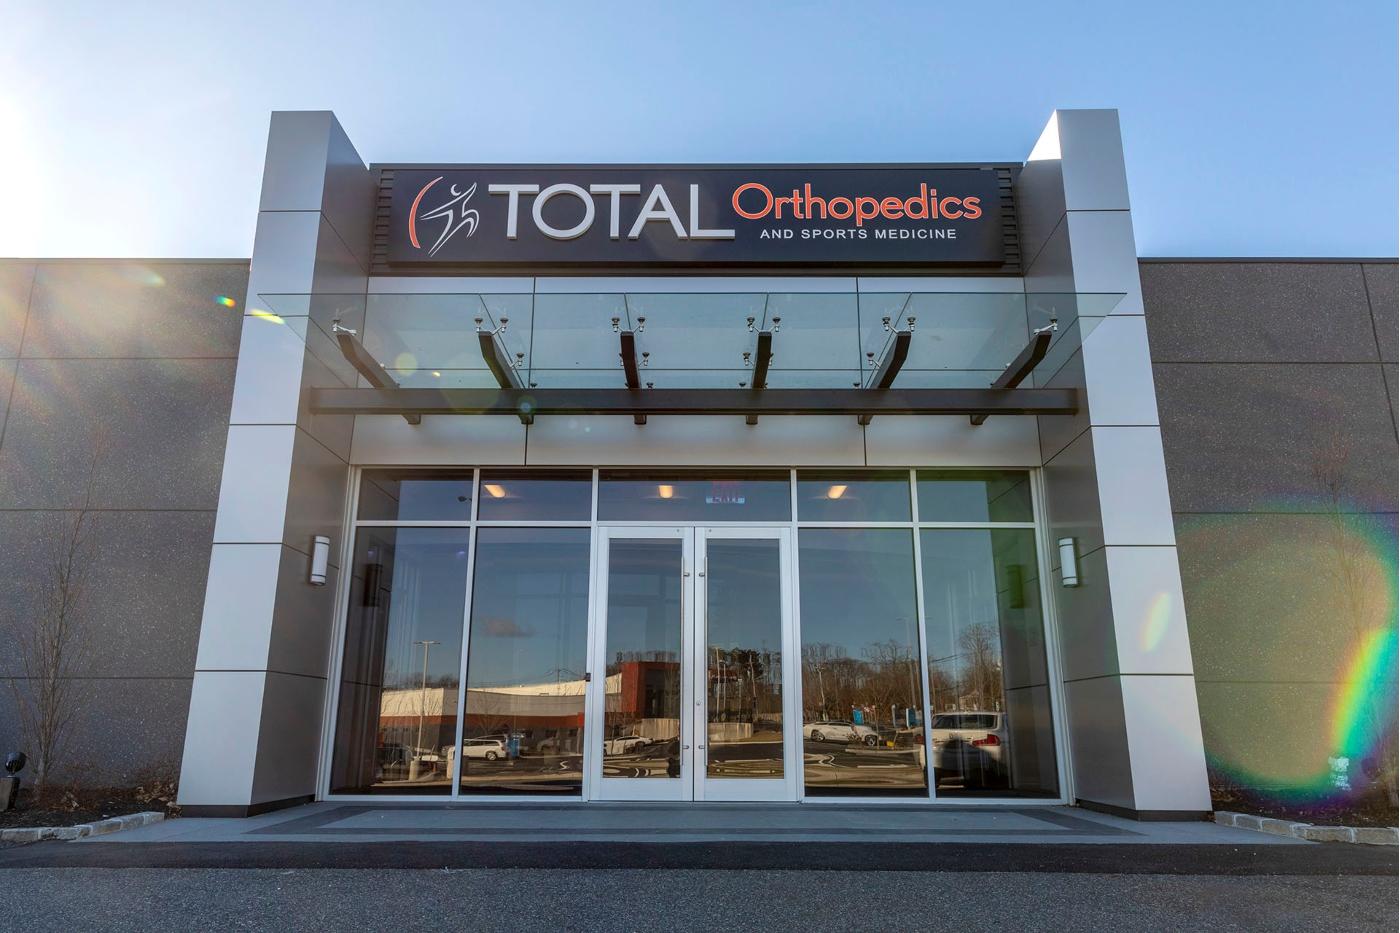 image of the Total Orthopedics & Sports Medicine clinic in Syosset NY